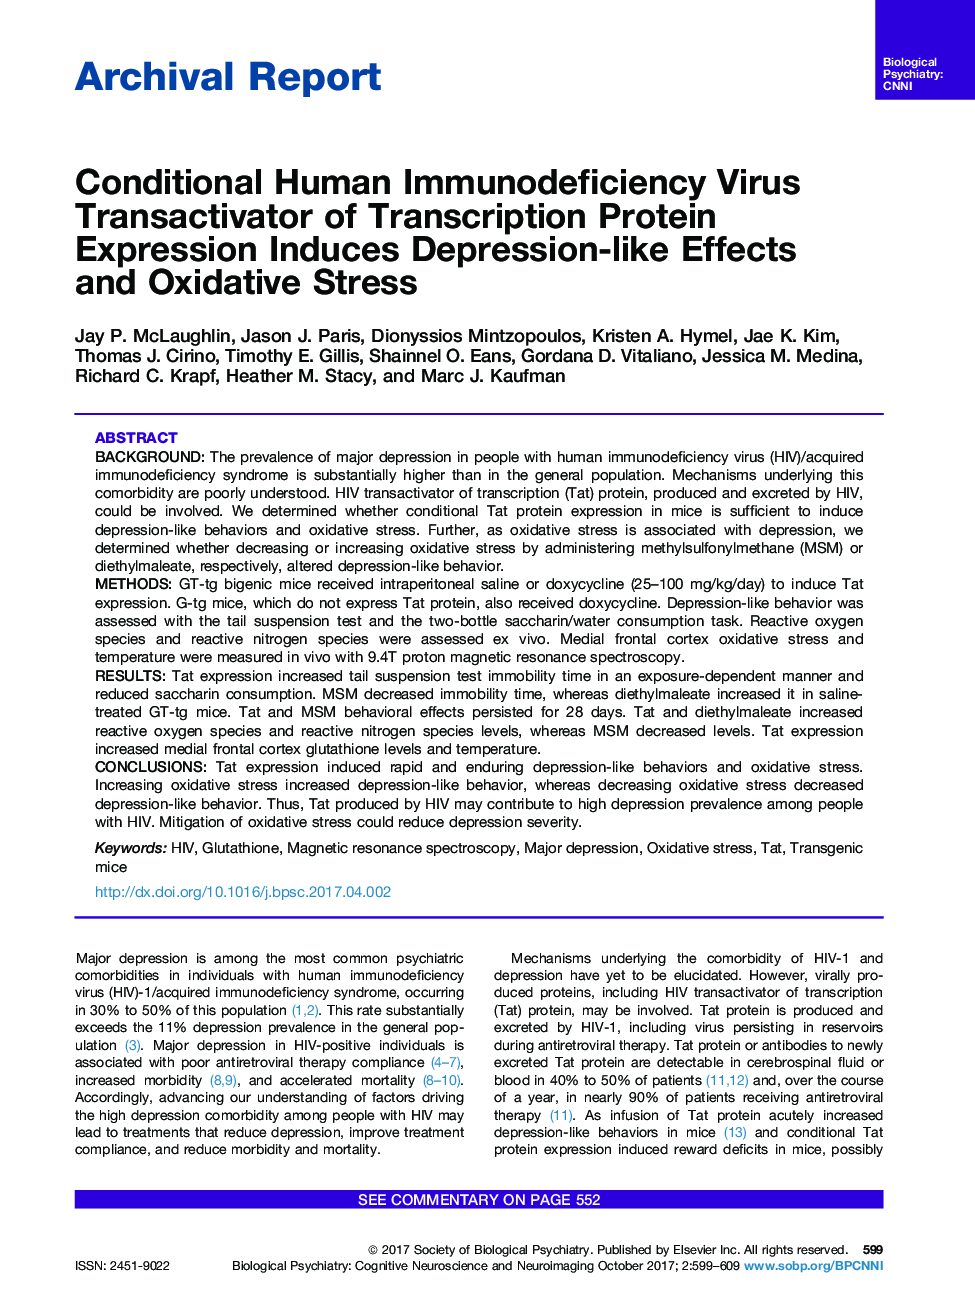 Archival ReportConditional Human Immunodeficiency Virus Transactivator of Transcription Protein Expression Induces Depression-like Effects andÂ Oxidative Stress